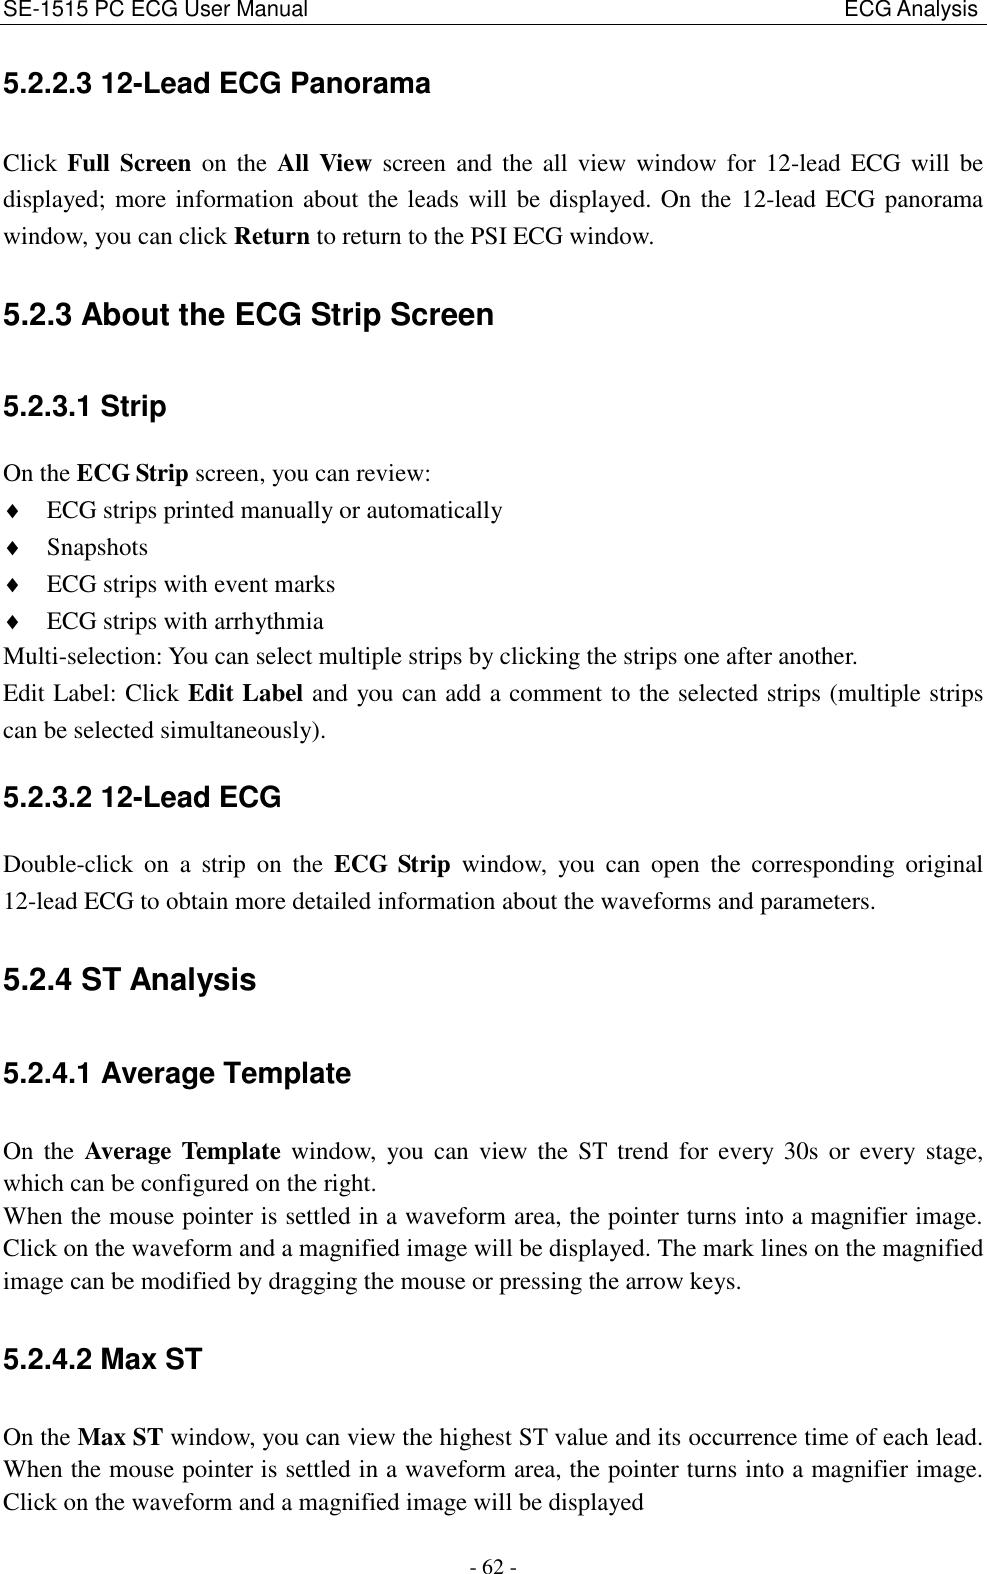 SE-1515 PC ECG User Manual                                                                                                  ECG Analysis - 62 - 5.2.2.3 12-Lead ECG Panorama Click  Full Screen on  the  All  View  screen  and  the  all  view window for  12-lead ECG  will  be displayed; more information about the leads will be displayed. On the 12-lead ECG panorama window, you can click Return to return to the PSI ECG window. 5.2.3 About the ECG Strip Screen 5.2.3.1 Strip On the ECG Strip screen, you can review:  ECG strips printed manually or automatically  Snapshots  ECG strips with event marks  ECG strips with arrhythmia Multi-selection: You can select multiple strips by clicking the strips one after another. Edit Label: Click Edit Label and you can add a comment to the selected strips (multiple strips can be selected simultaneously). 5.2.3.2 12-Lead ECG Double-click  on  a  strip  on  the  ECG  Strip  window,  you  can  open  the  corresponding  original 12-lead ECG to obtain more detailed information about the waveforms and parameters. 5.2.4 ST Analysis 5.2.4.1 Average Template On  the  Average Template  window,  you can  view  the  ST trend  for  every  30s  or  every  stage, which can be configured on the right. When the mouse pointer is settled in a waveform area, the pointer turns into a magnifier image. Click on the waveform and a magnified image will be displayed. The mark lines on the magnified image can be modified by dragging the mouse or pressing the arrow keys. 5.2.4.2 Max ST On the Max ST window, you can view the highest ST value and its occurrence time of each lead. When the mouse pointer is settled in a waveform area, the pointer turns into a magnifier image. Click on the waveform and a magnified image will be displayed 